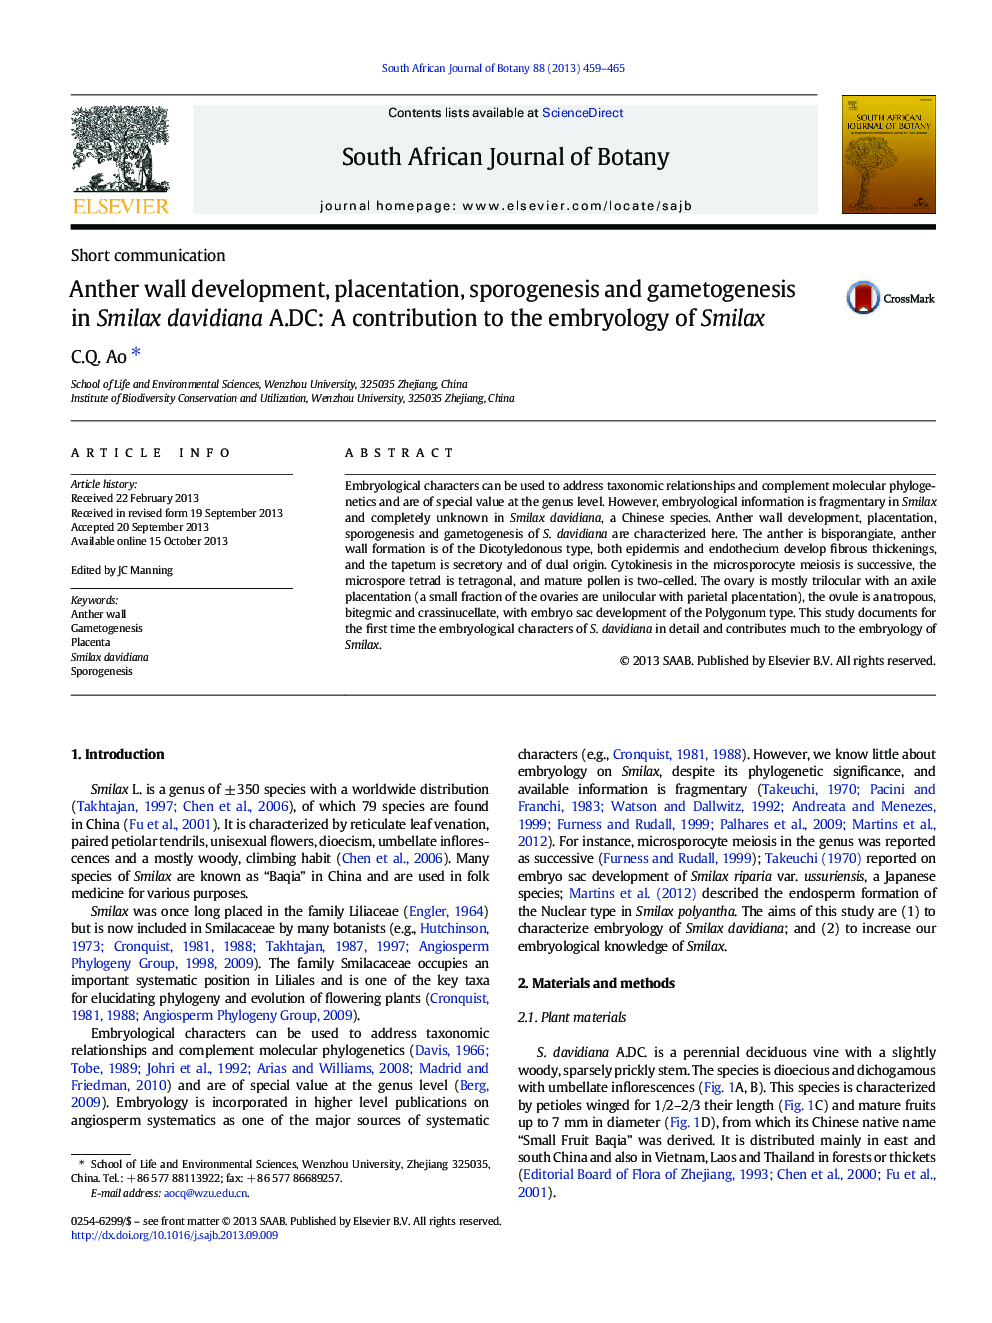 Anther wall development, placentation, sporogenesis and gametogenesis in Smilax davidiana A.DC: A contribution to the embryology of Smilax